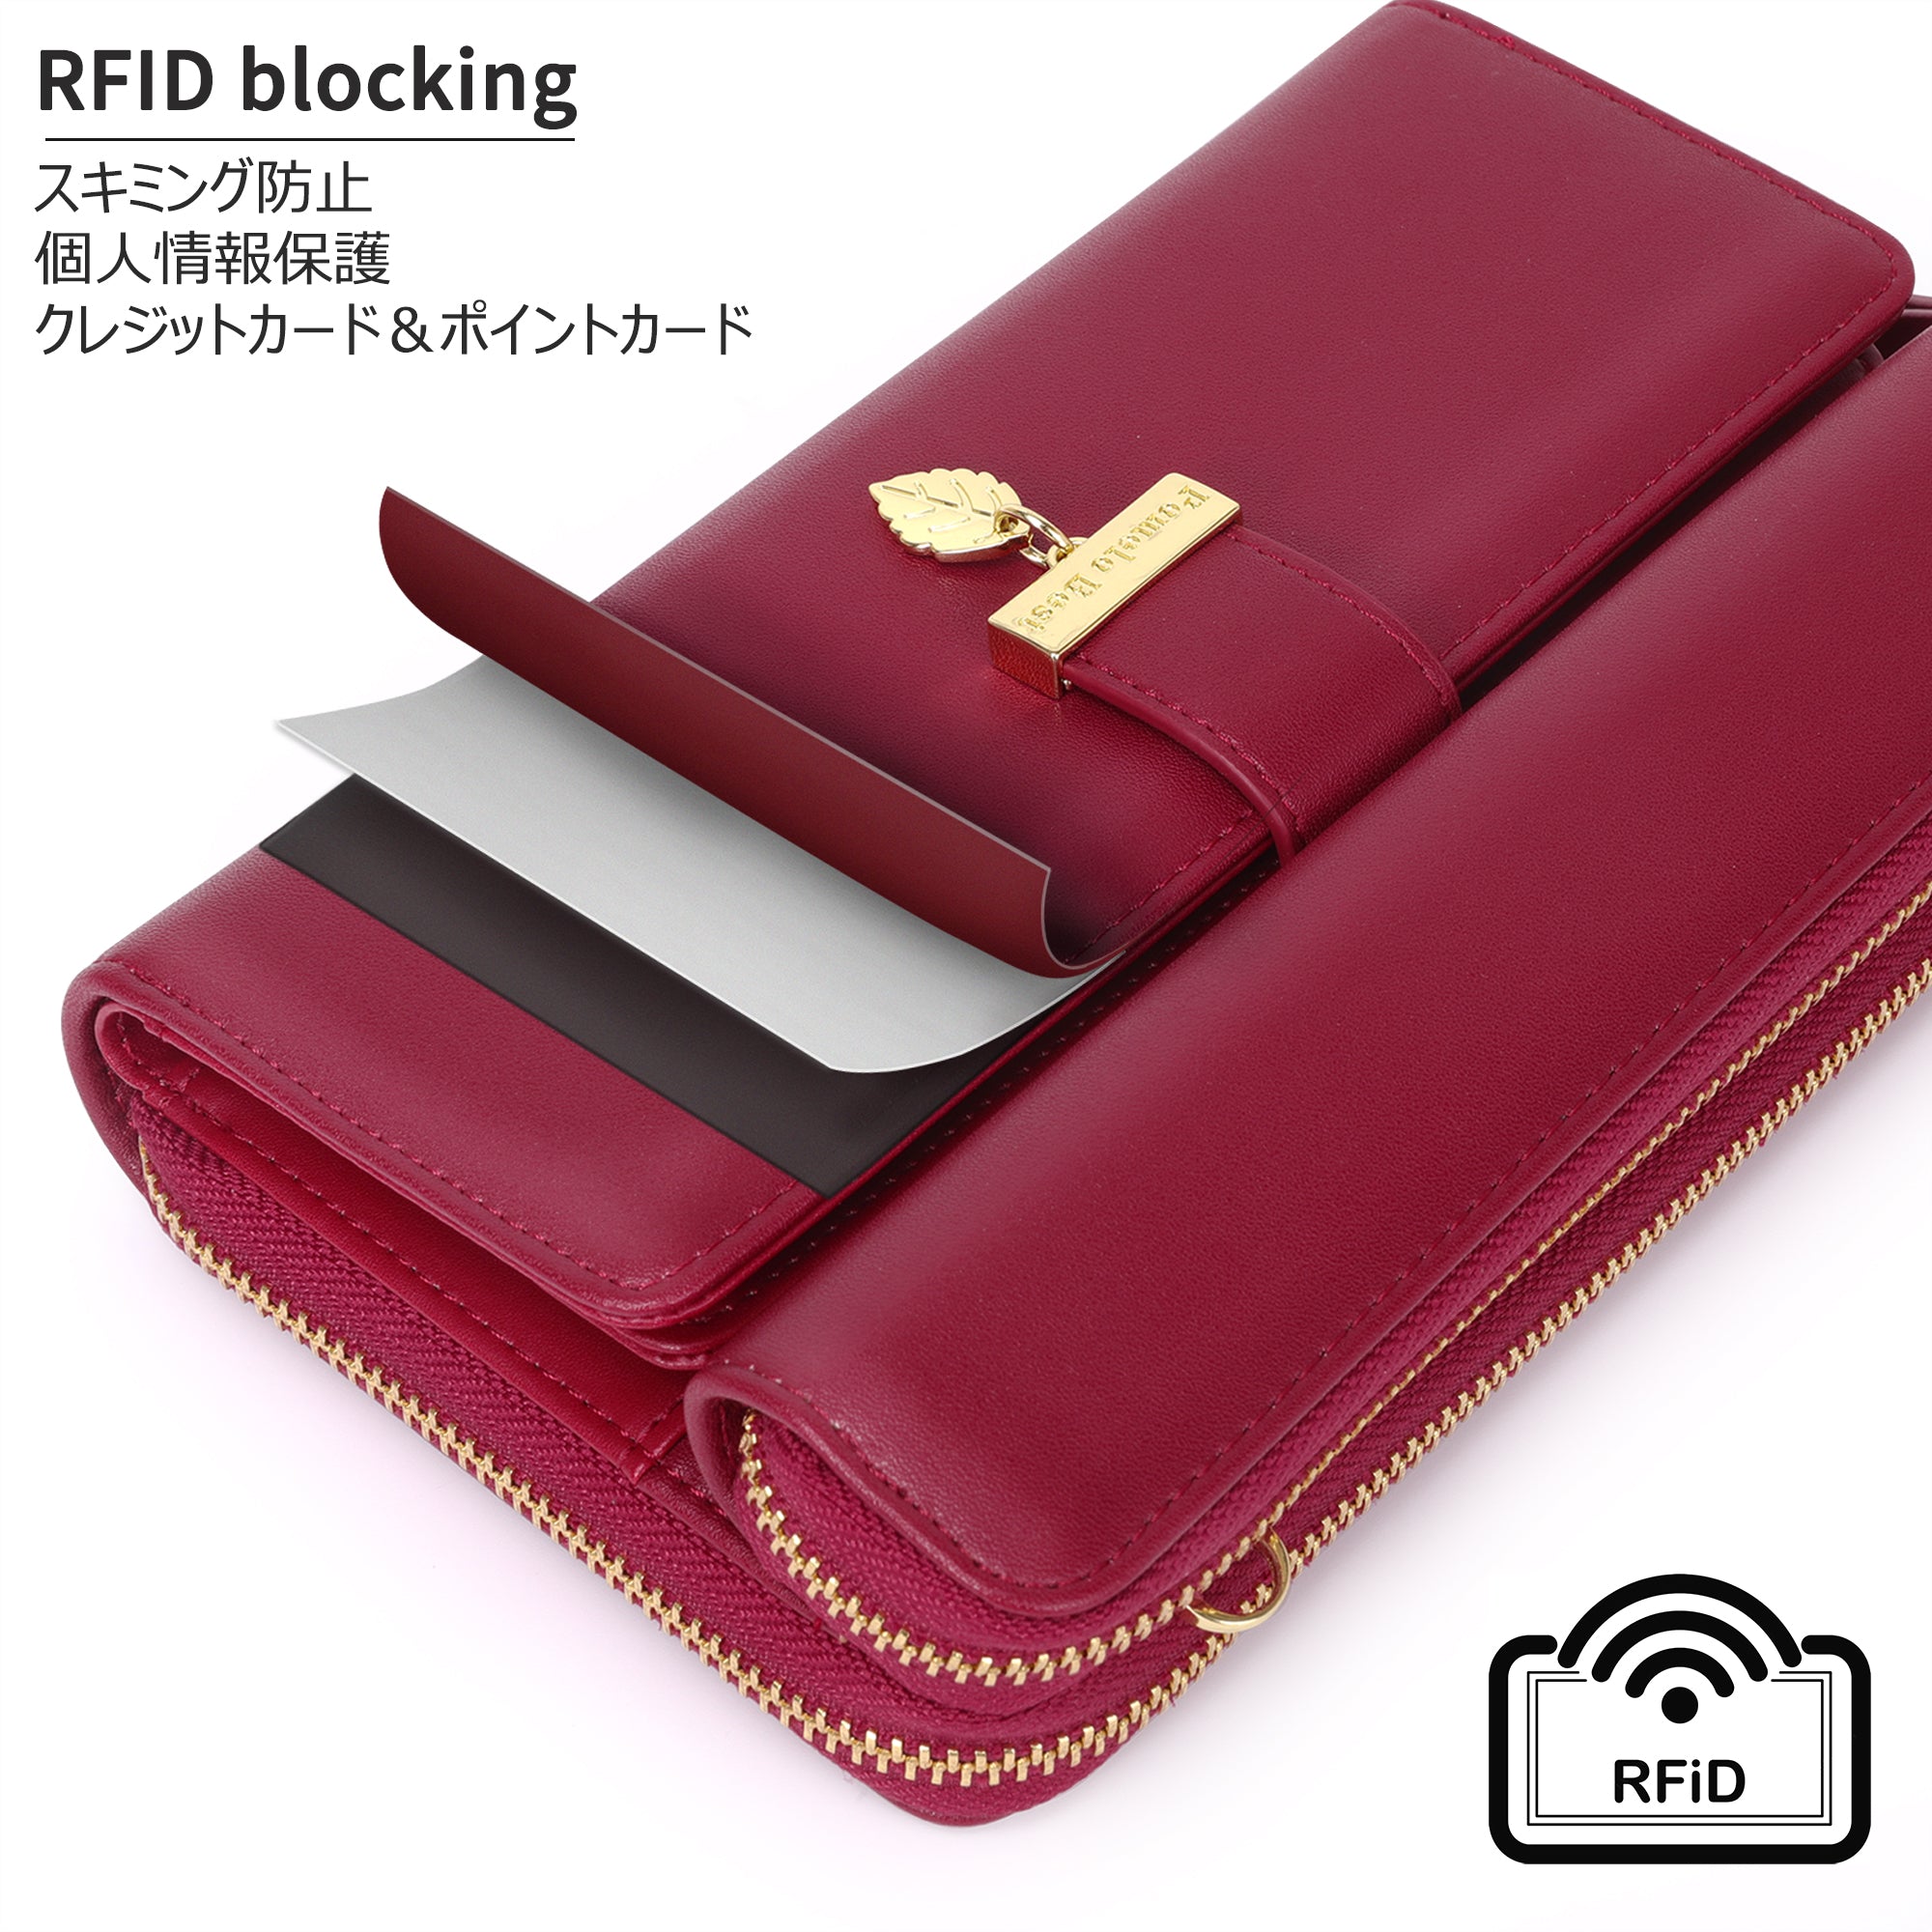 Crossbody Cell Phone Bag for Women with RFID Blocking and Enough to Fit Most Phone